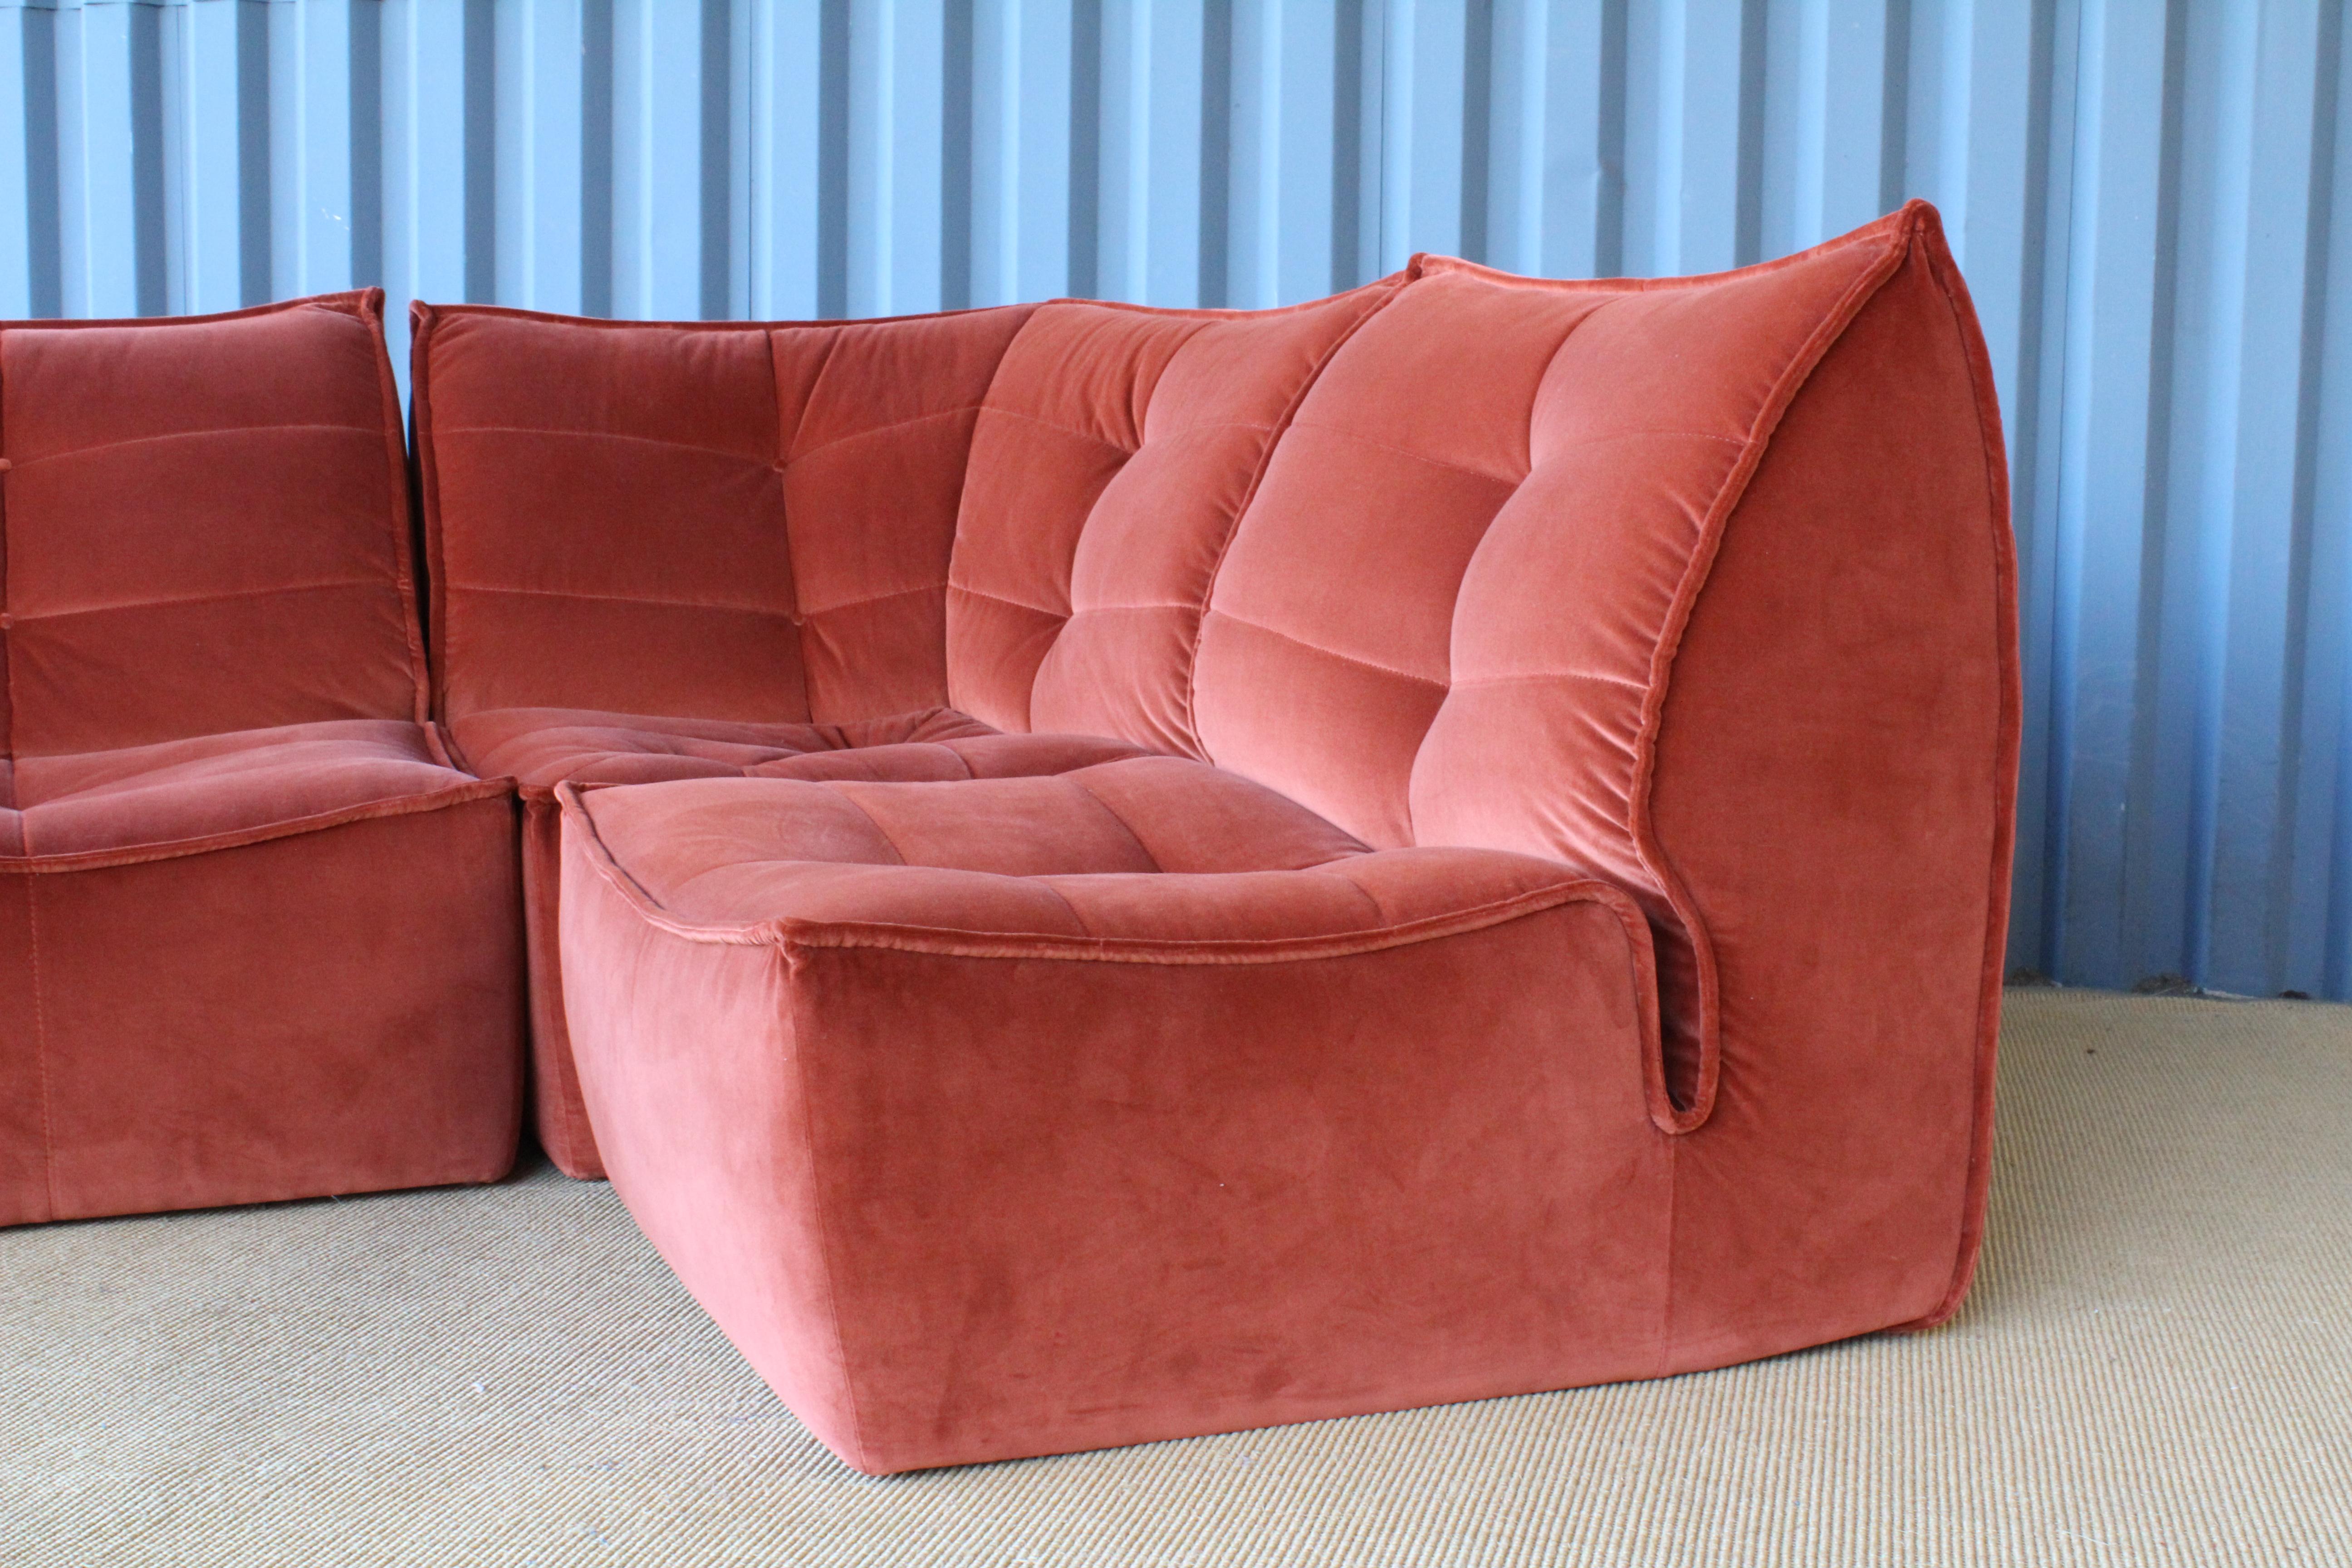 Four-Piece Sectional Sofa, Italy, 1960s (Samt)